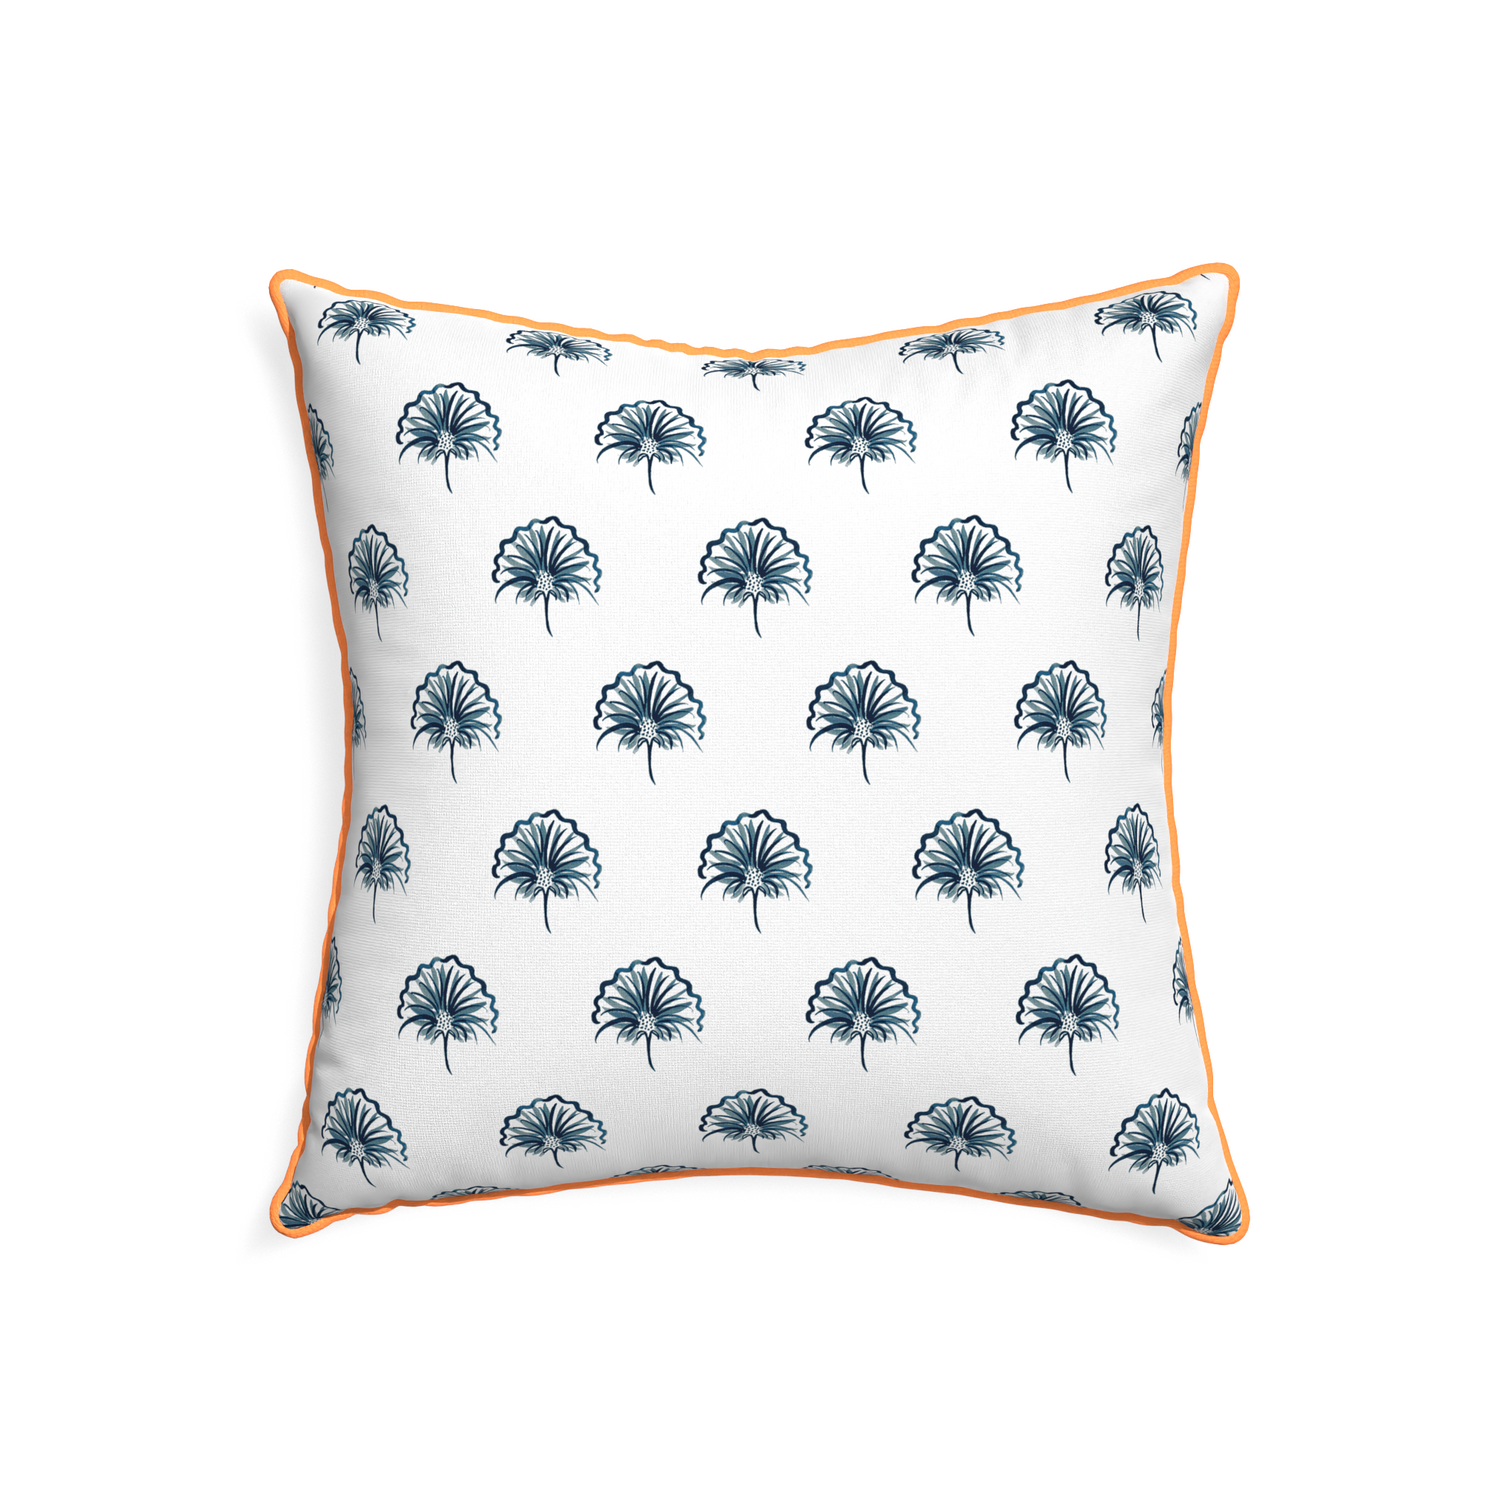 22-square penelope midnight custom floral navypillow with clementine piping on white background